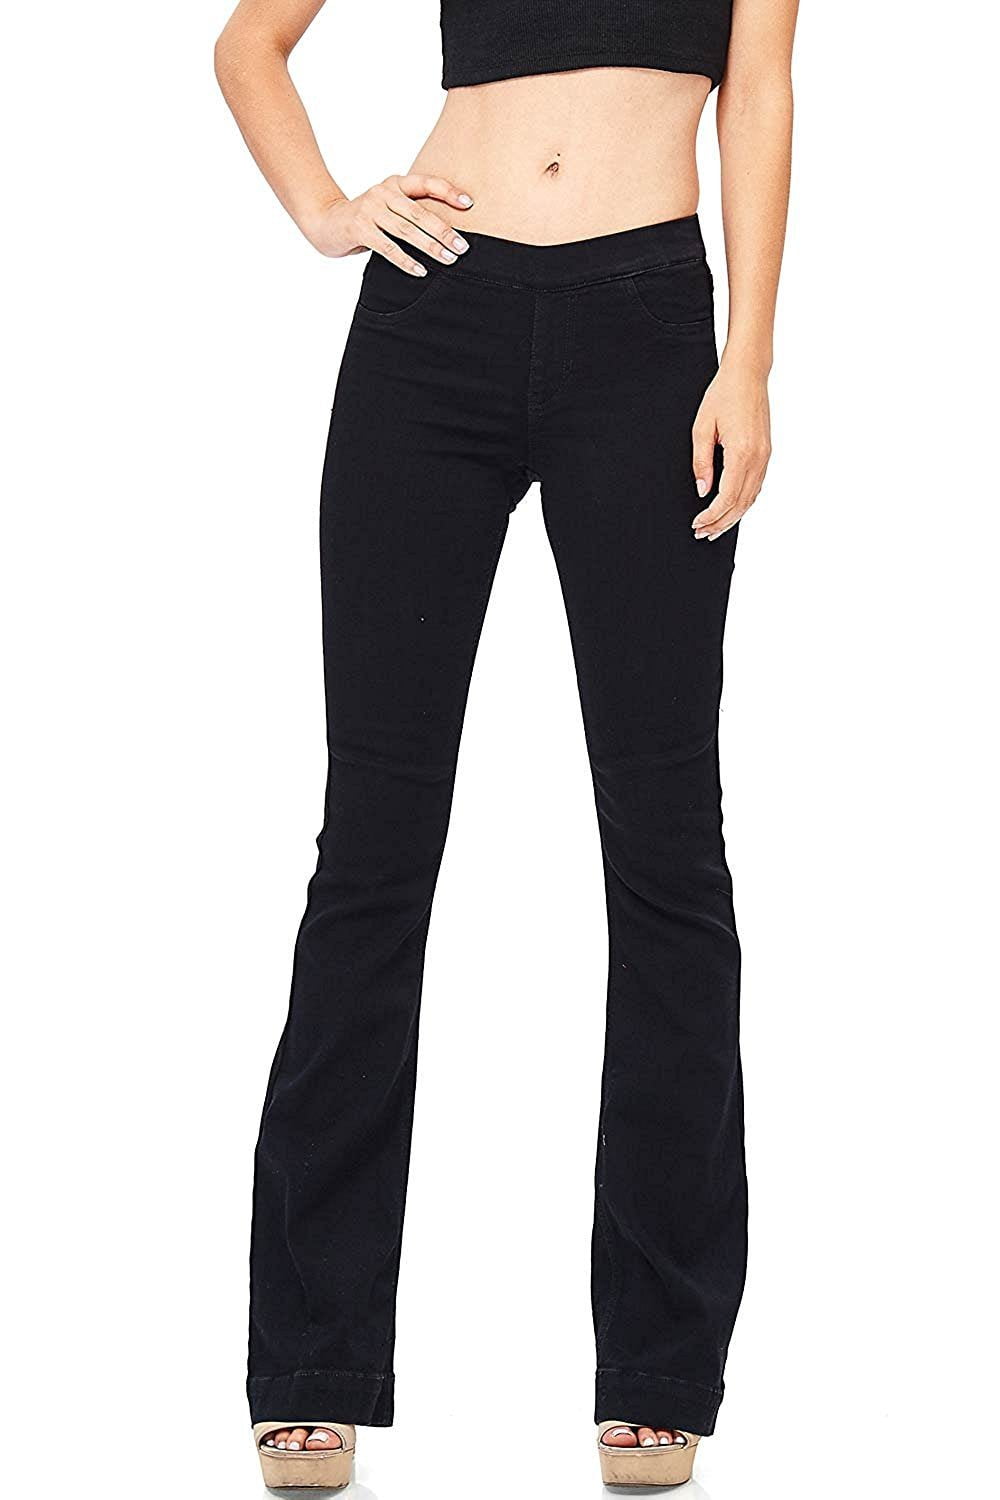 Cello Womens Juniors Mid Waist Skinny Fit Bootcut Pants